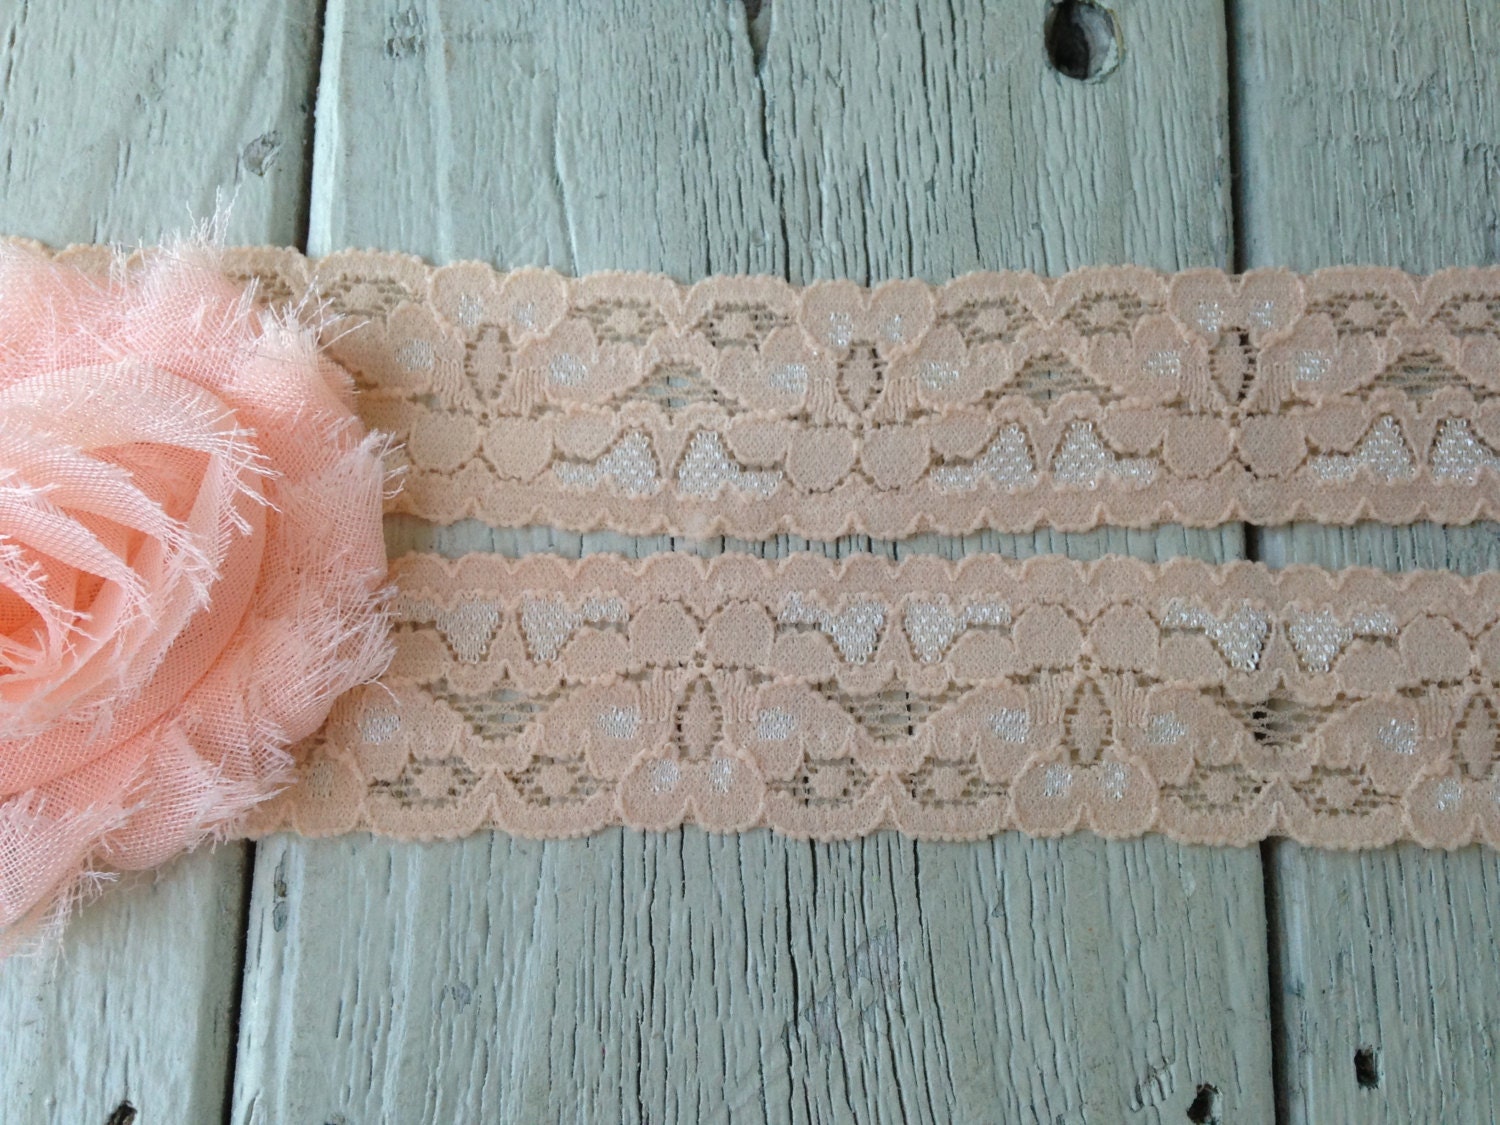 Blush Pink Lace Fabric Light Lilac Lace Royal Blue Wedding Lace Peach Lace  Fabric Lace Cord Floral Lace Embroidery Fabric 10 Color Lace Buy 